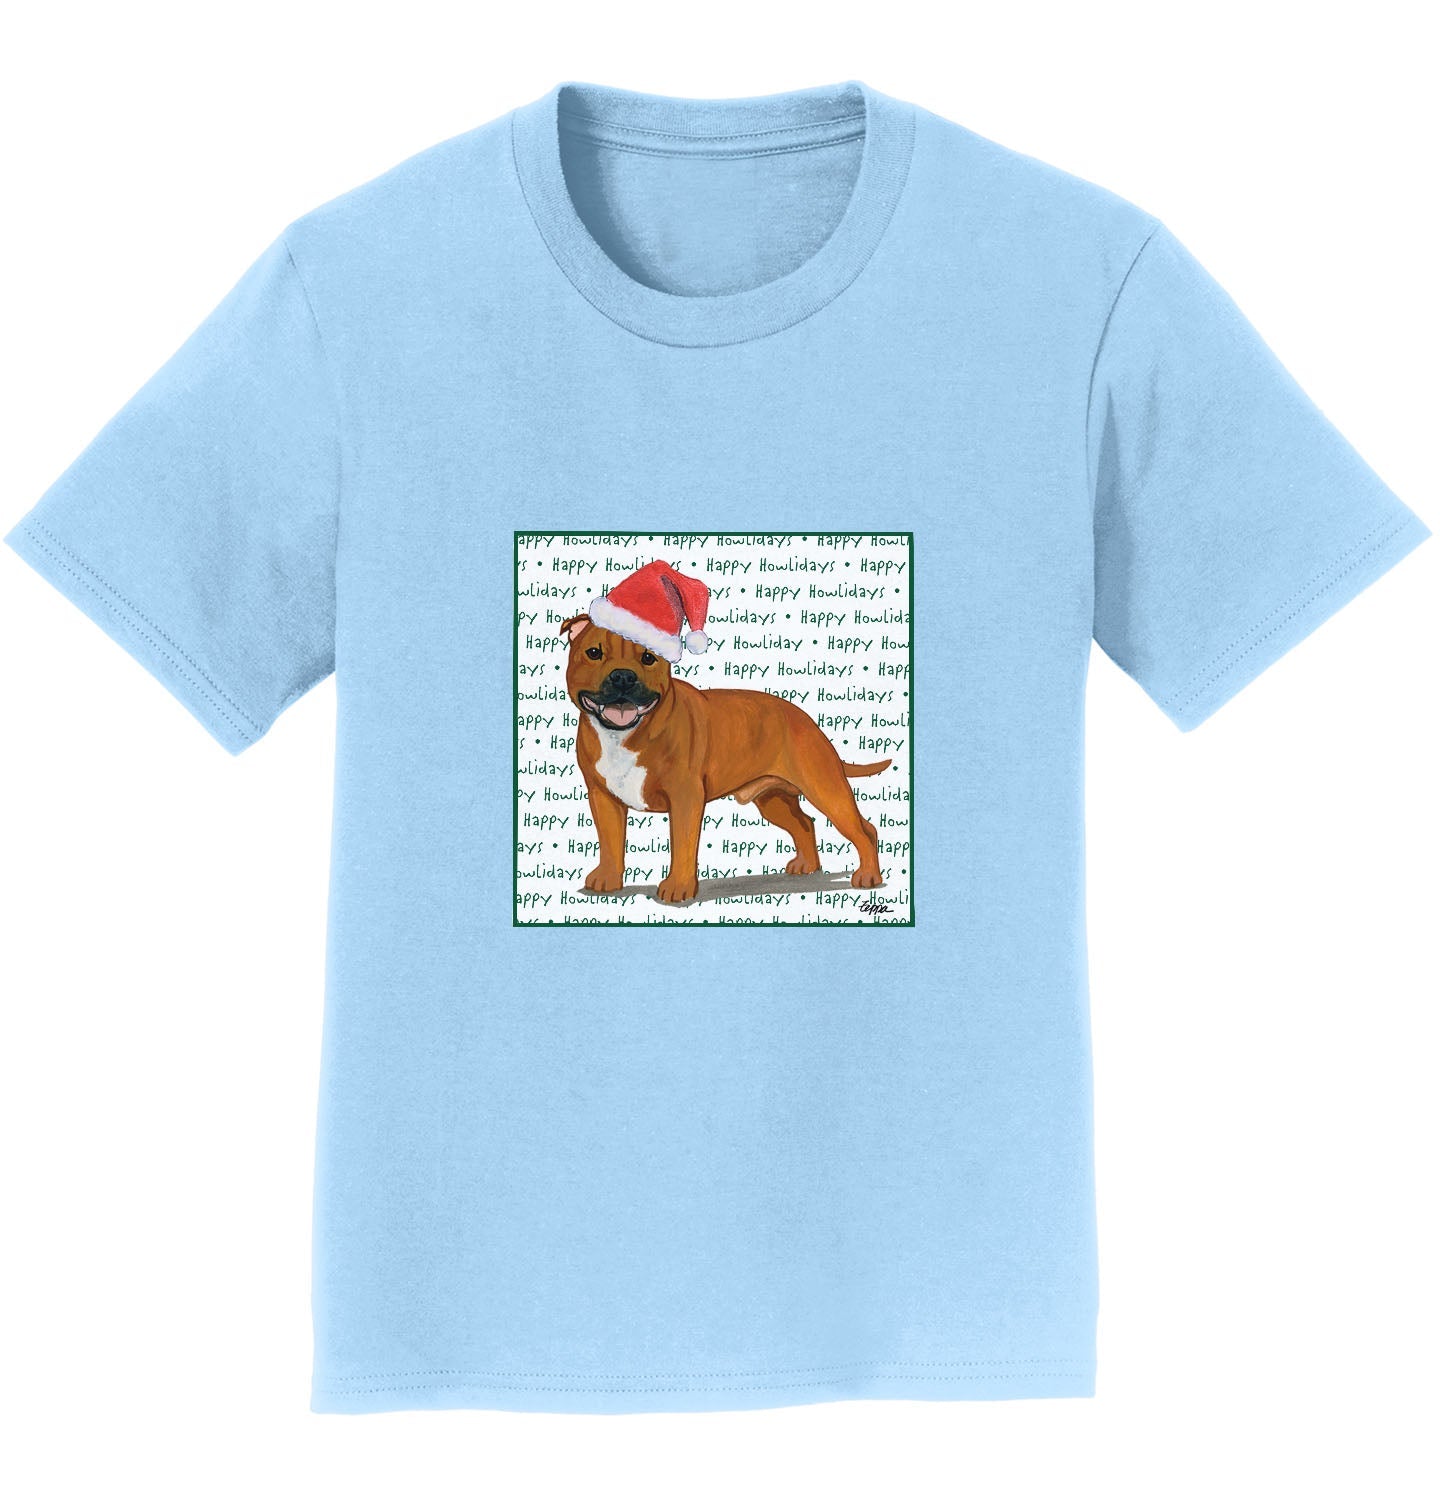 American Staffordshire Terrier (Red) Happy Howlidays Text - Kids' Unisex T-Shirt